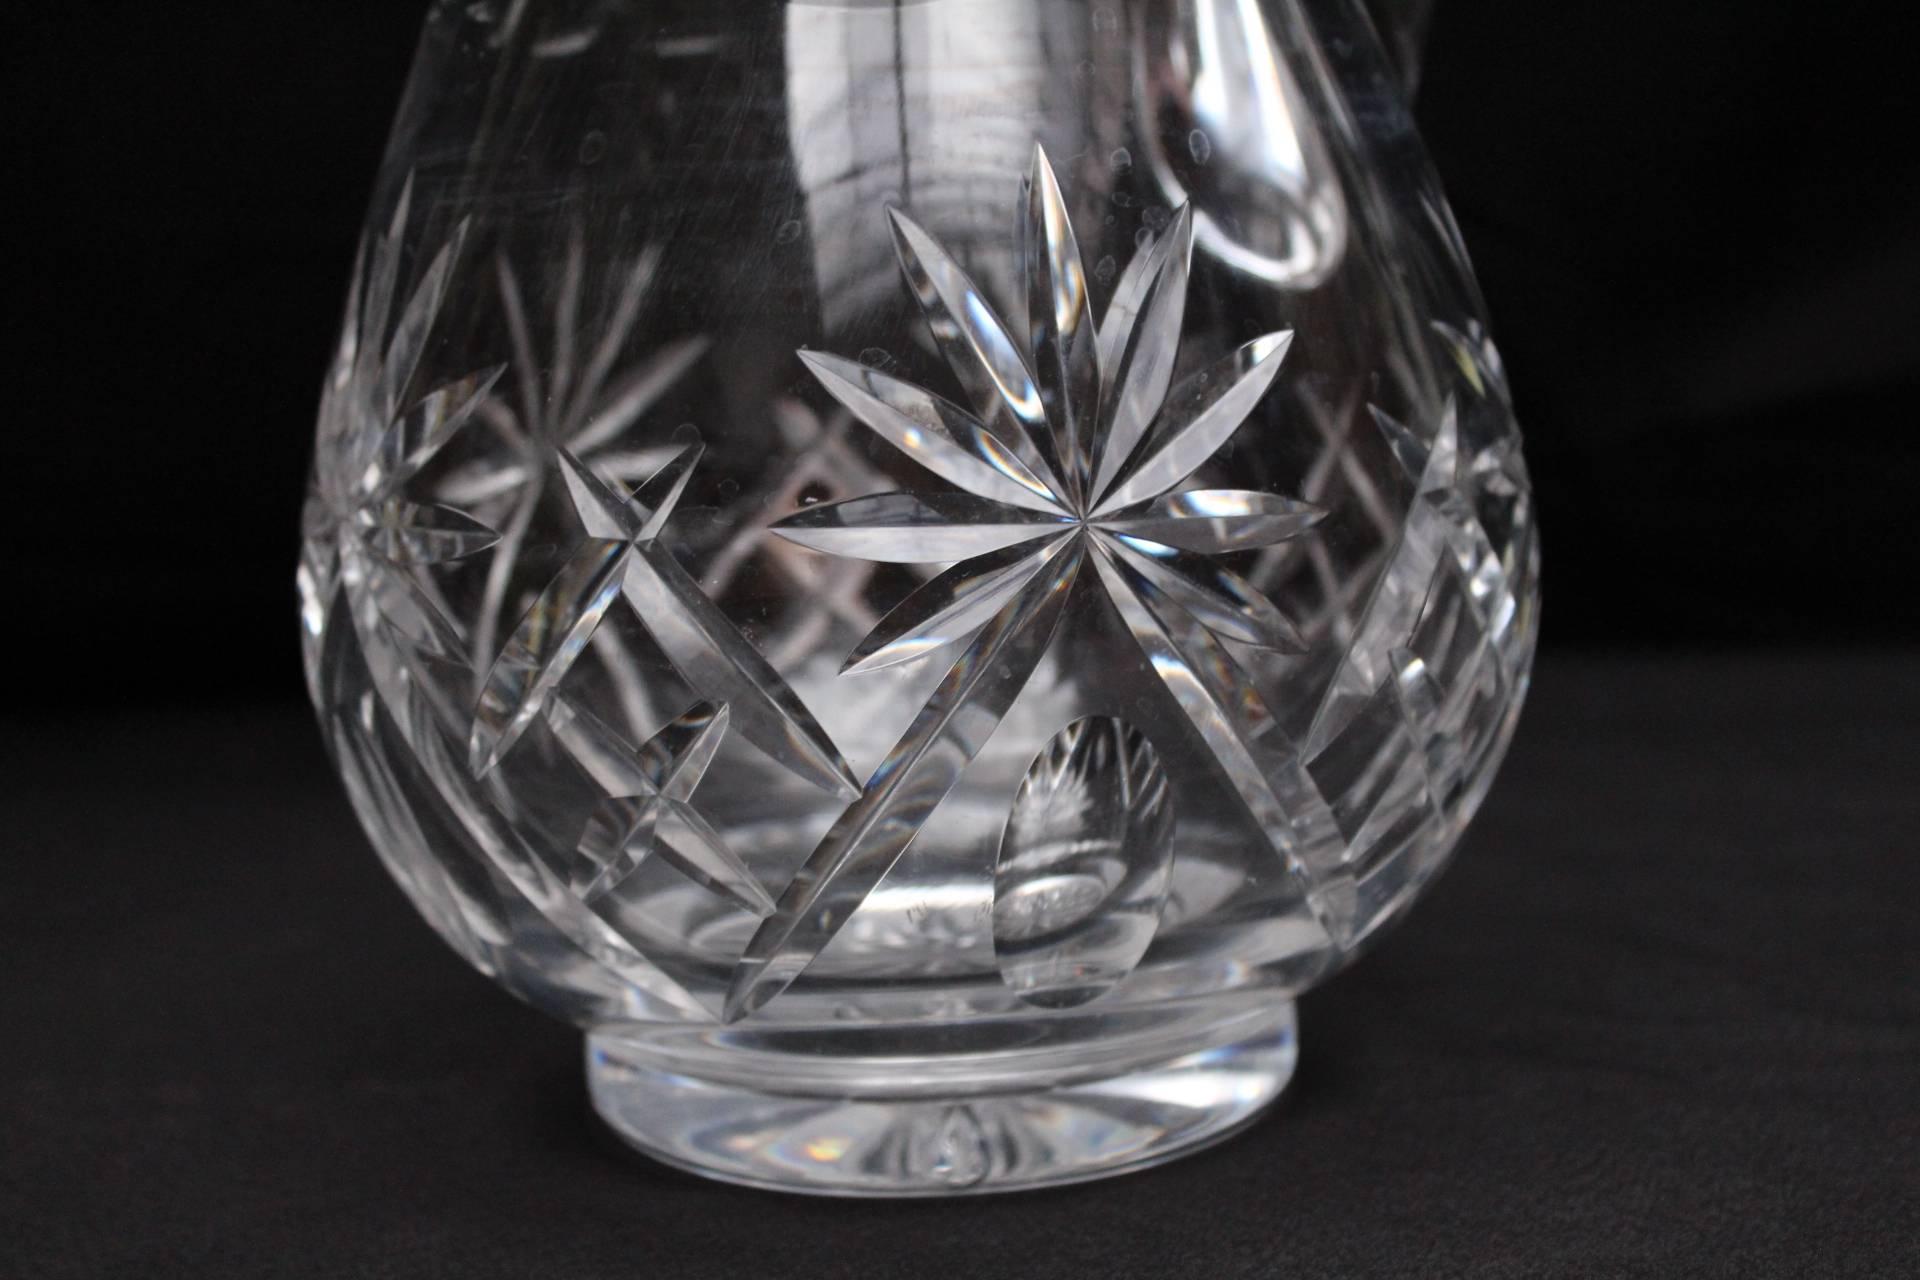 French Water Pitcher, Baccarat Crystal, 19th Century, France